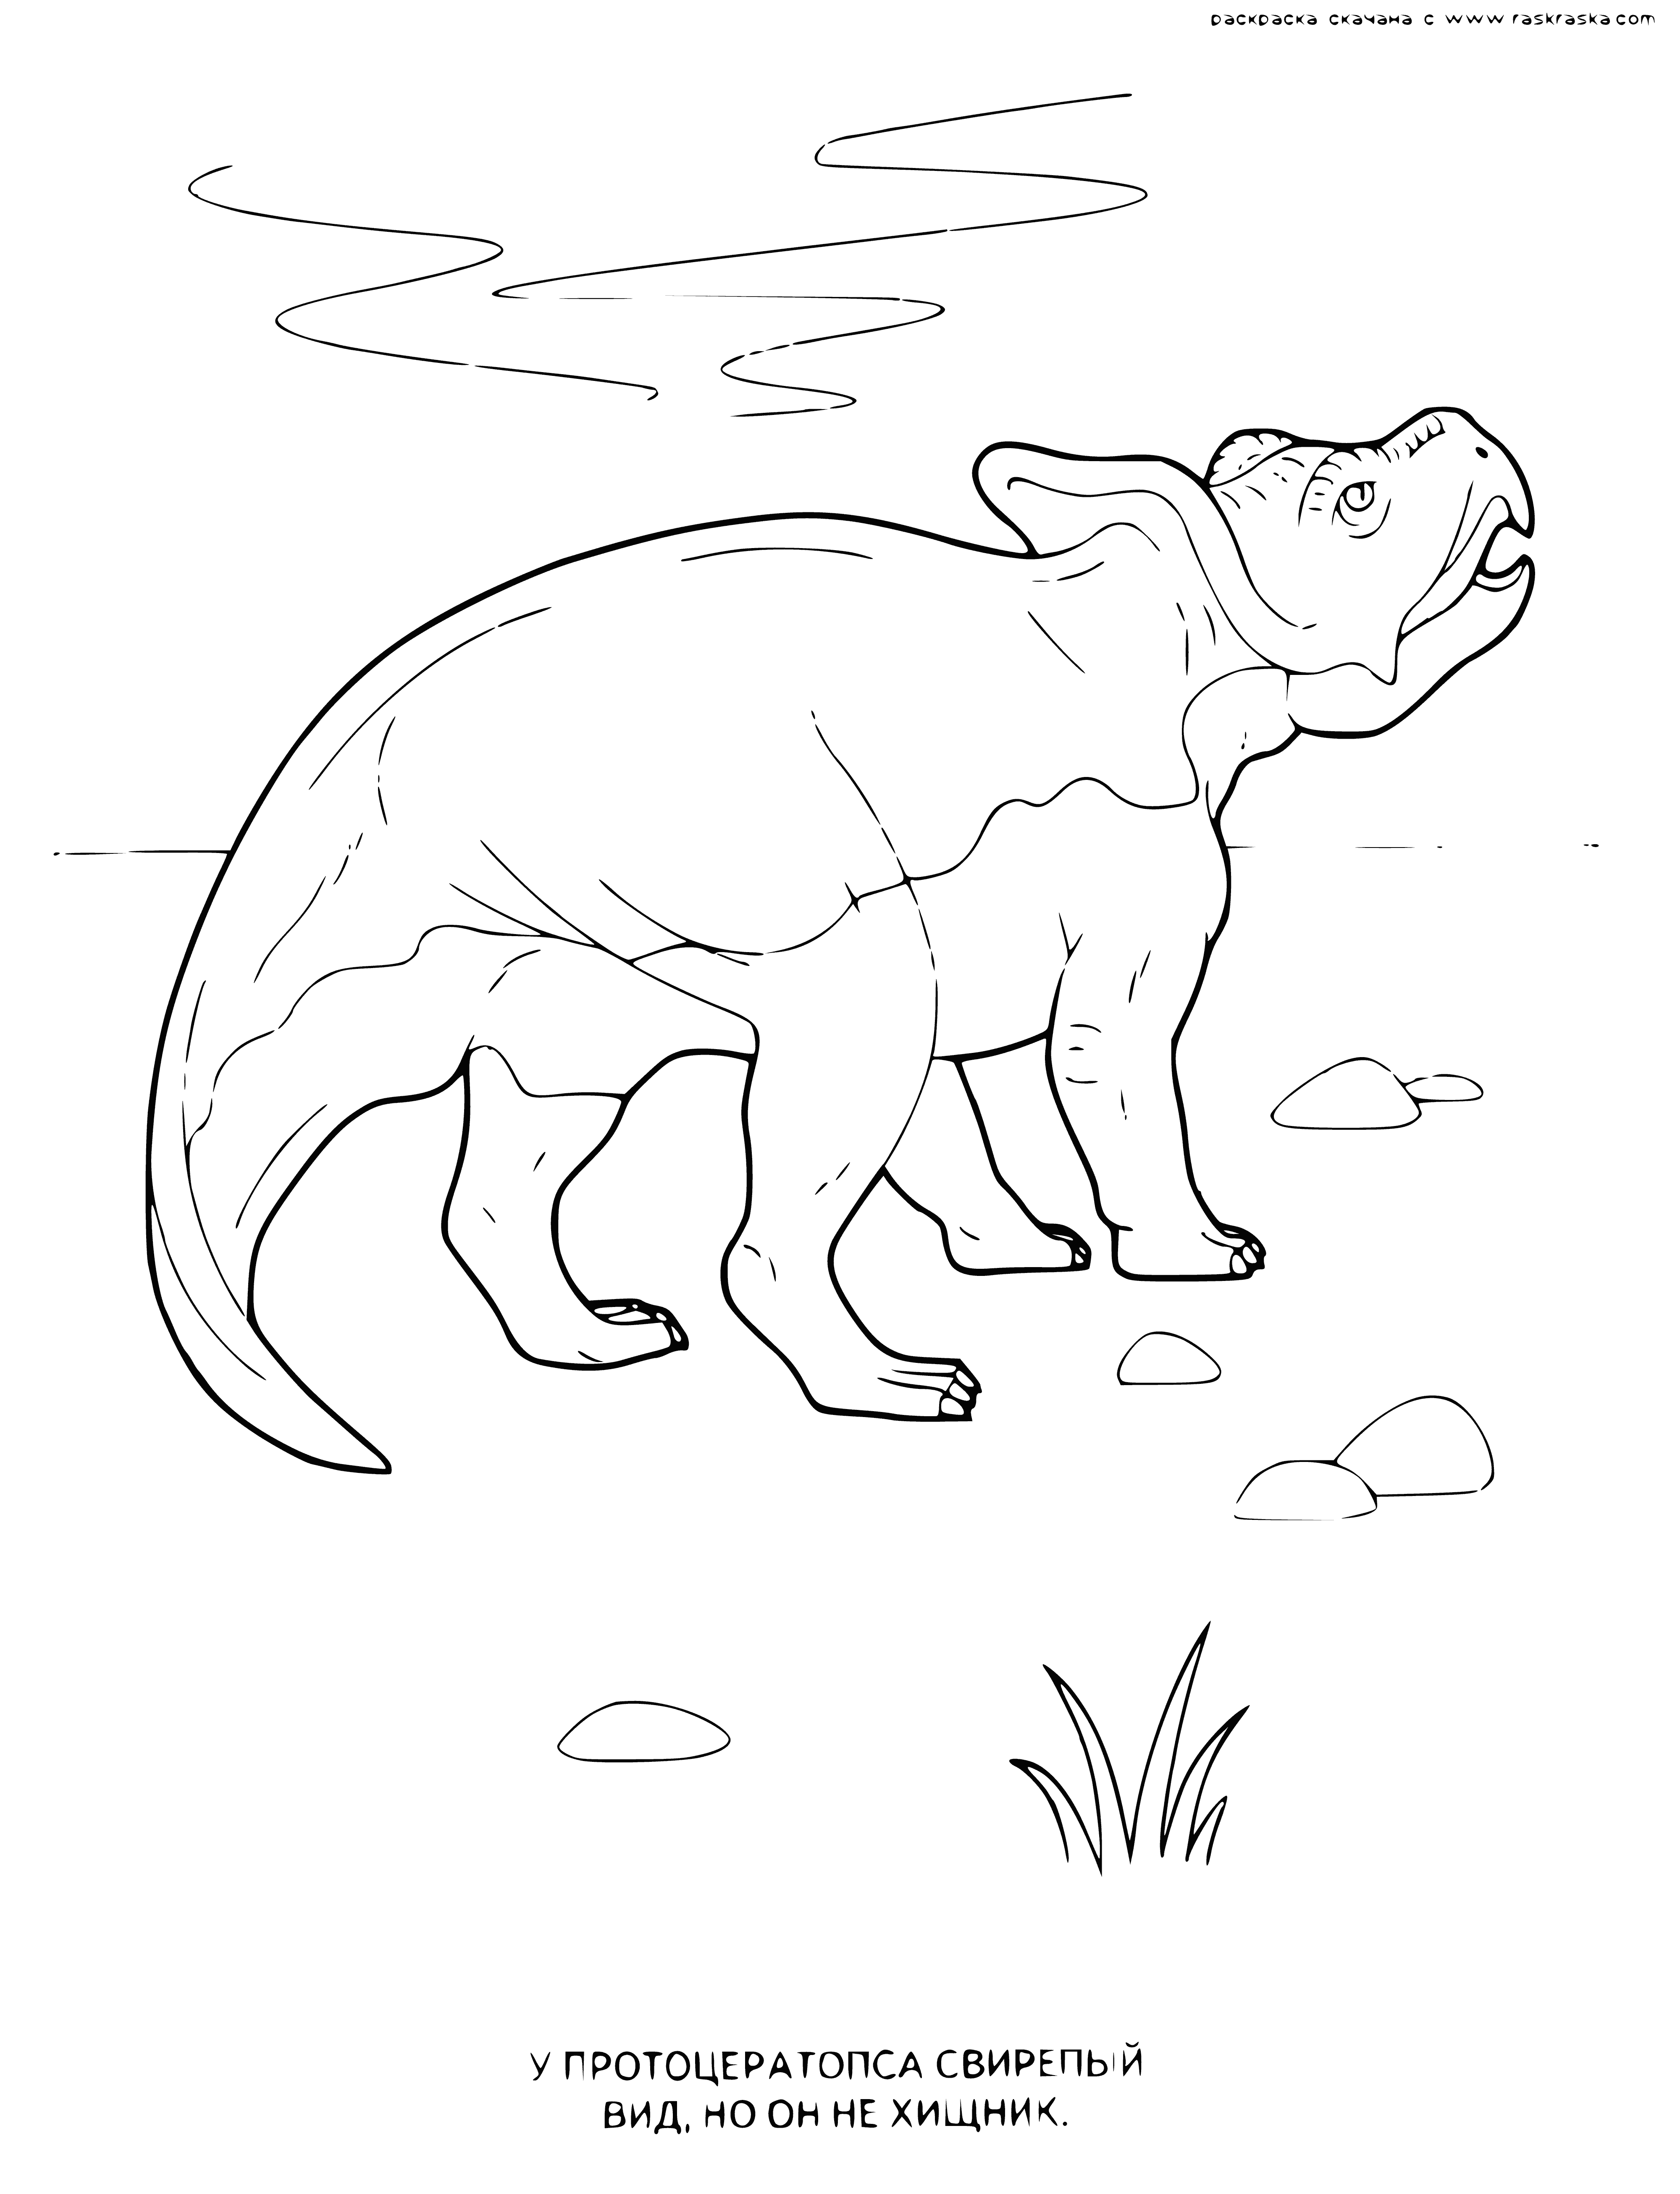 Proceratops coloring page